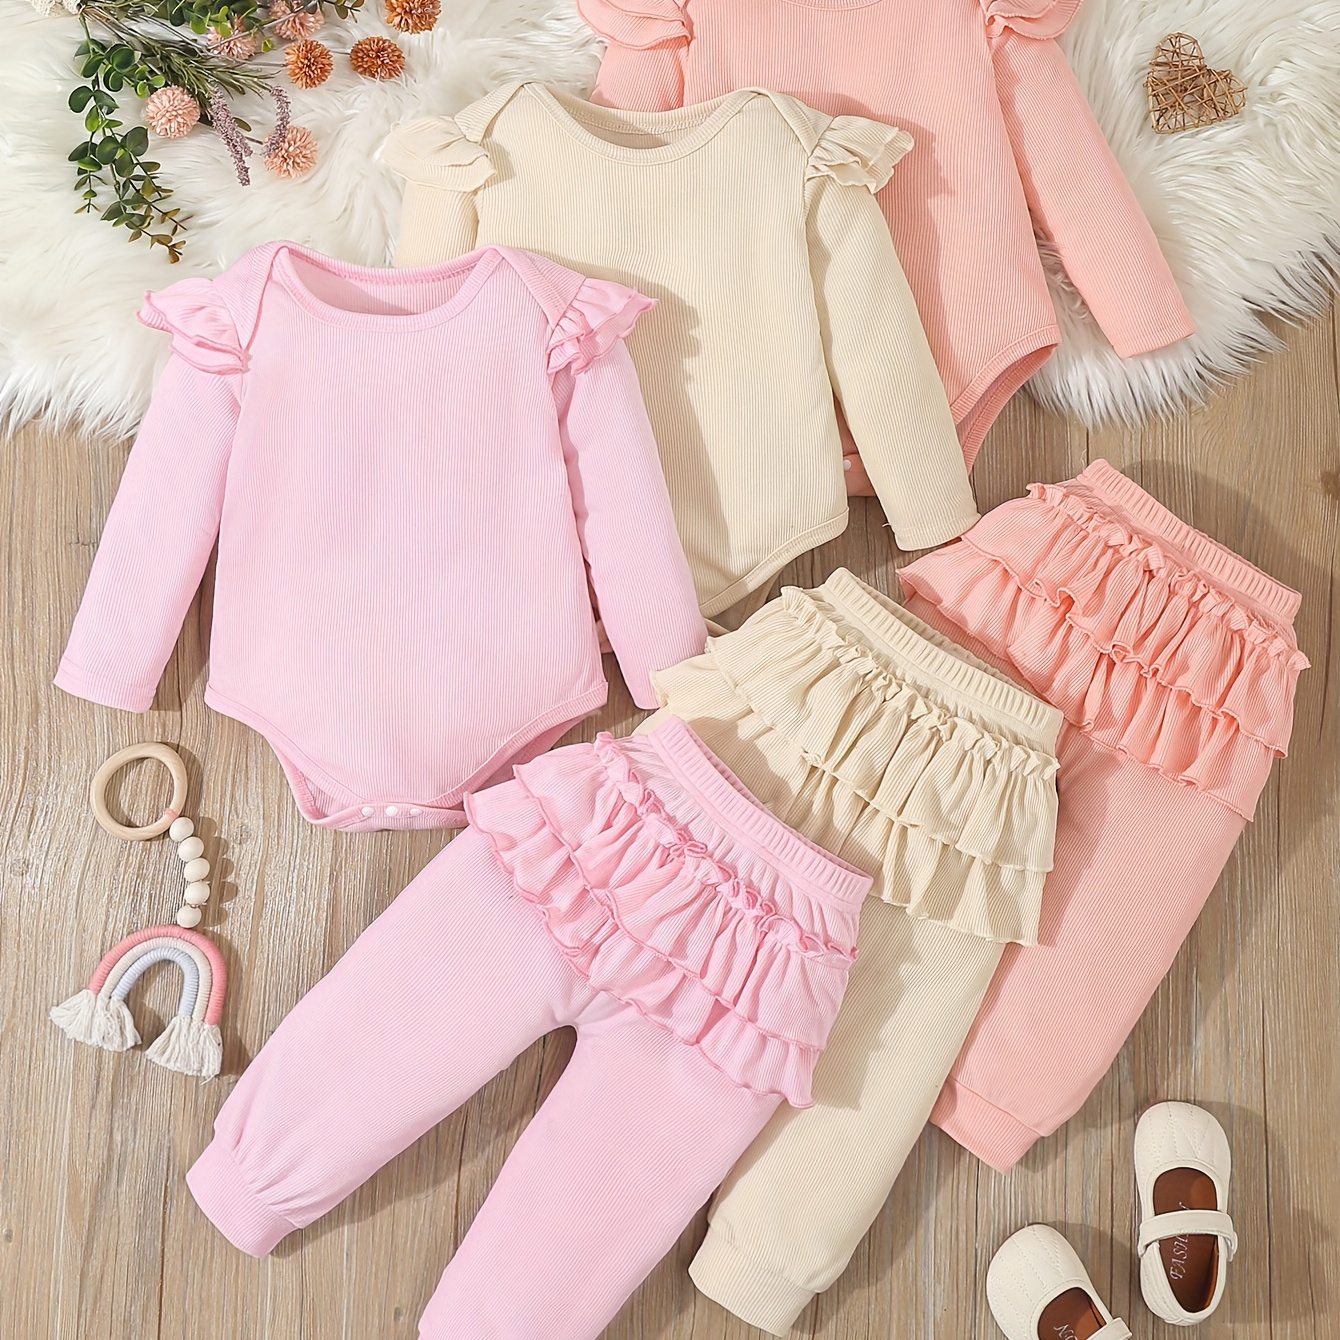 

3 Sets Baby's Ruffle Decor Long Sleeve Bodysuit & Casual Pants, Toddler & Infant Girl's Clothing Set For Spring Fall